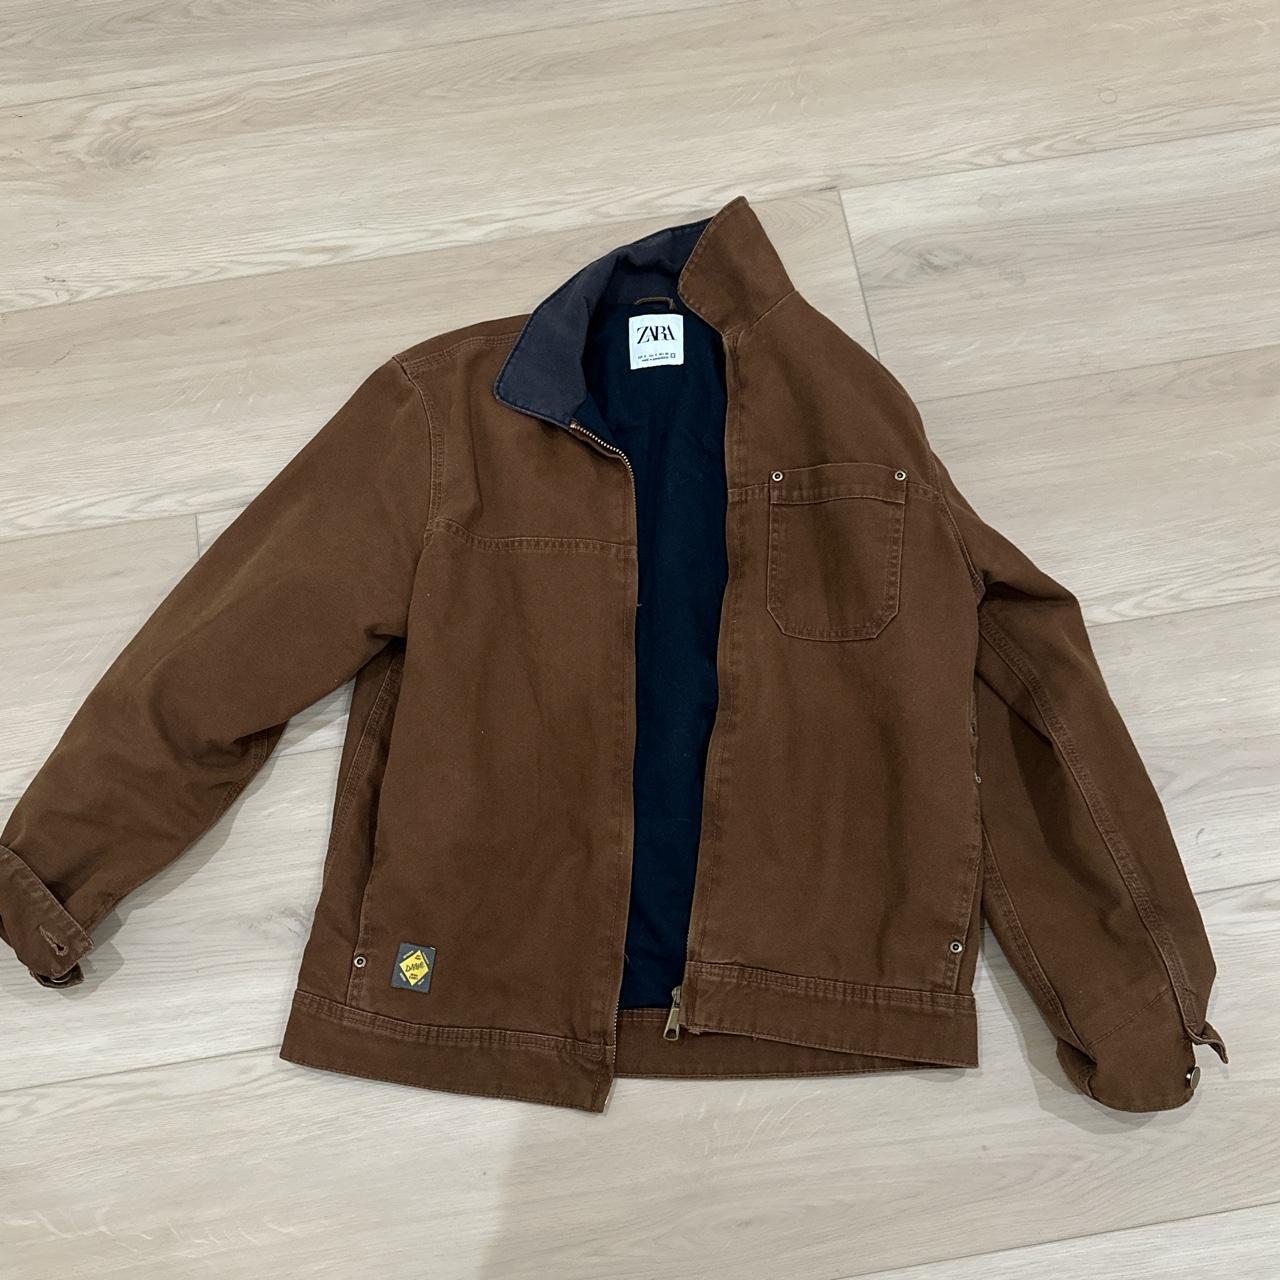 ZARA Brown Heavy Jacket WE PAY SHIPPING 🖤 Message... - Depop